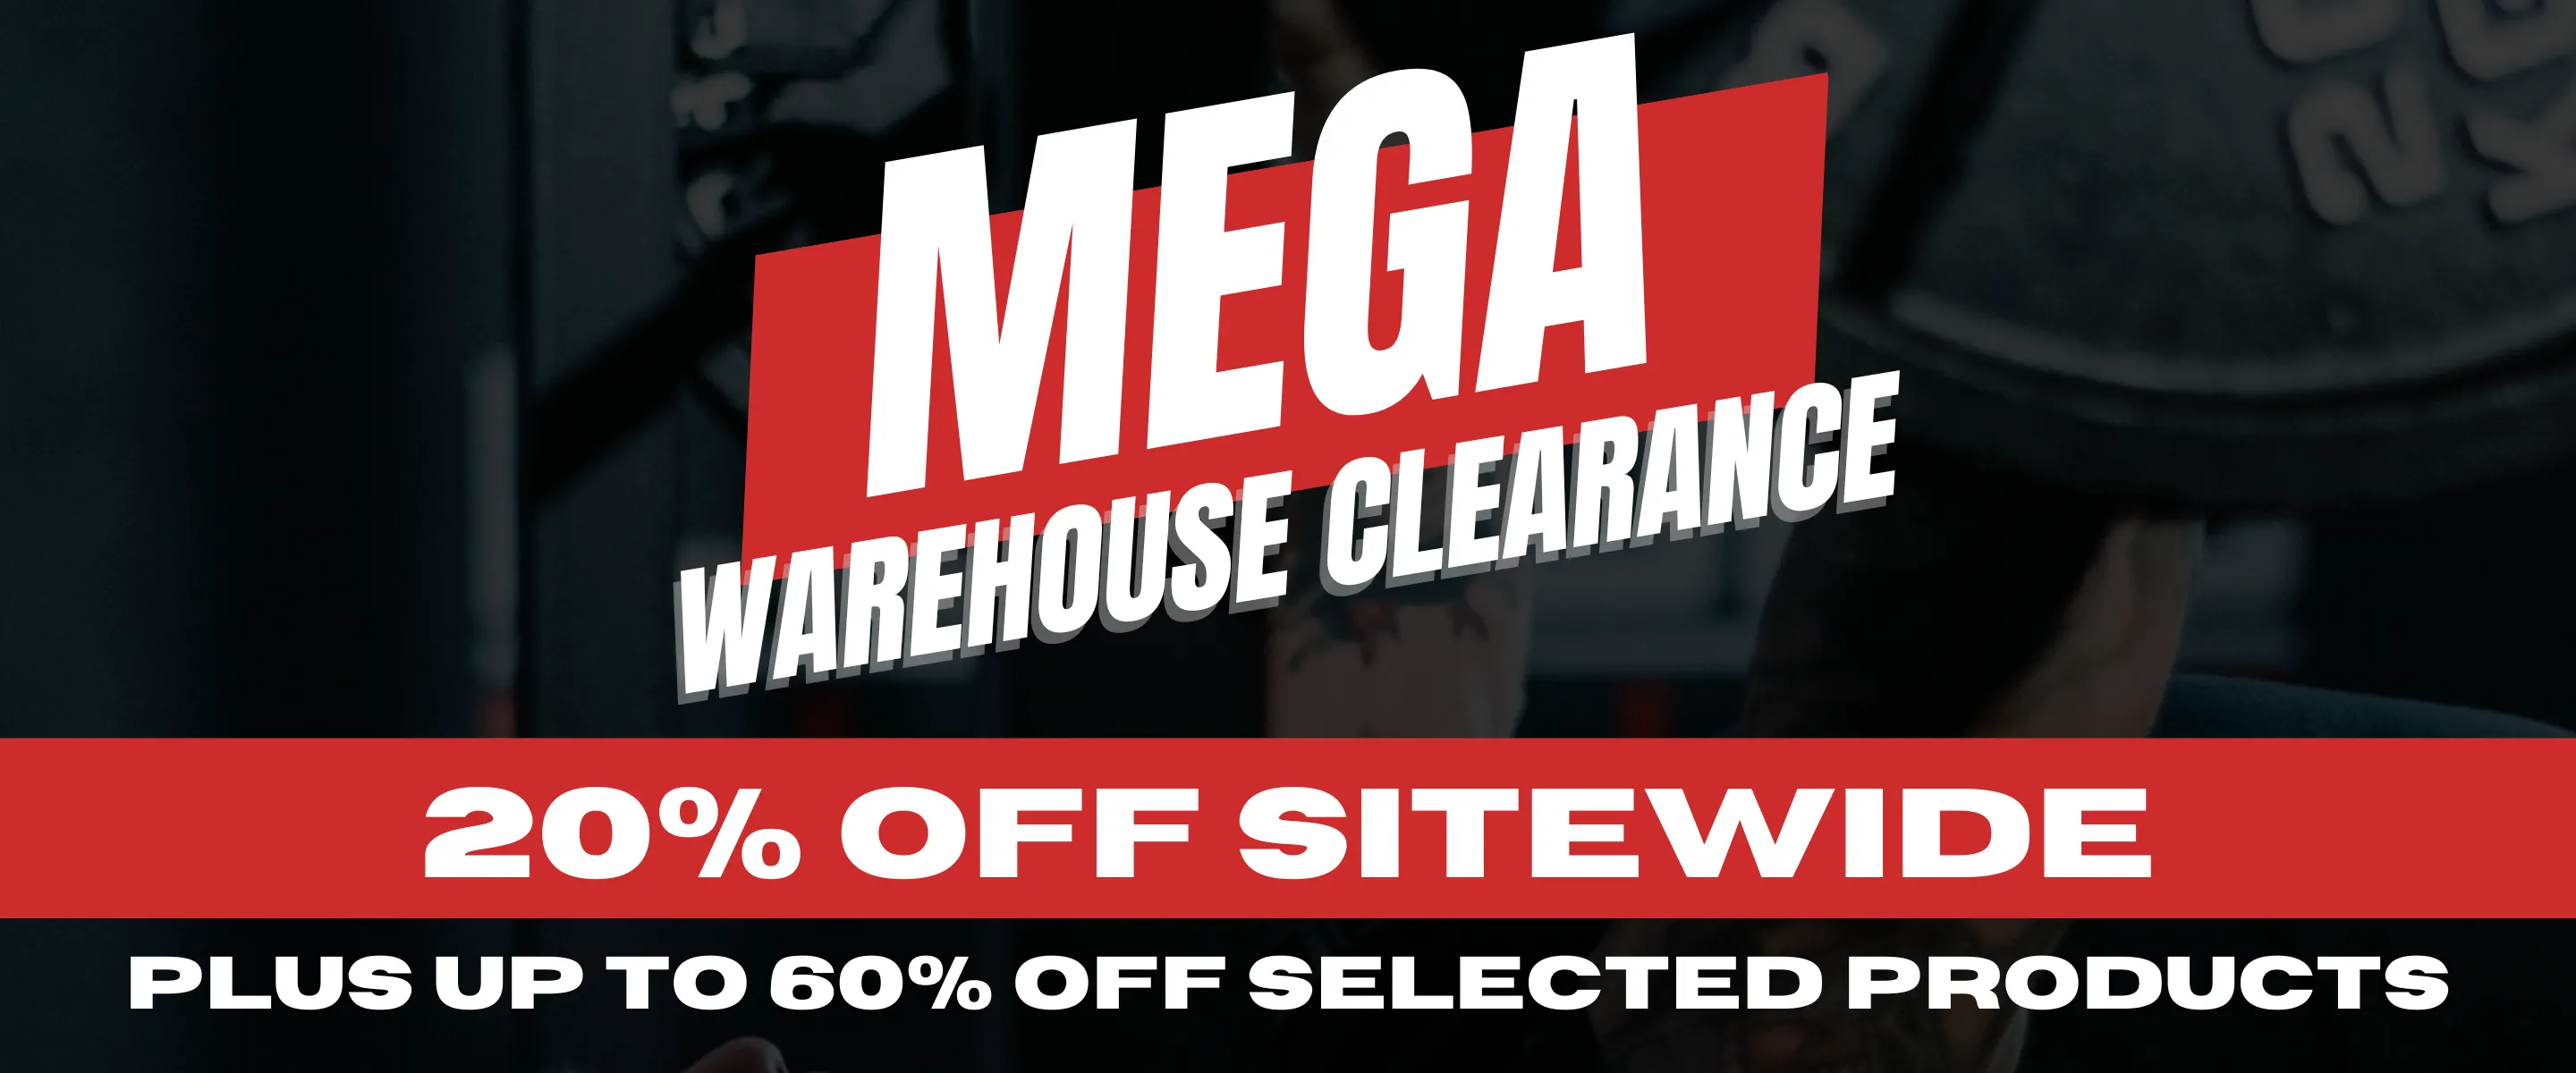 Loaded Lifting Mega Warehouse clearance 20% OFF sitewide + up to 60% OFF on selected products